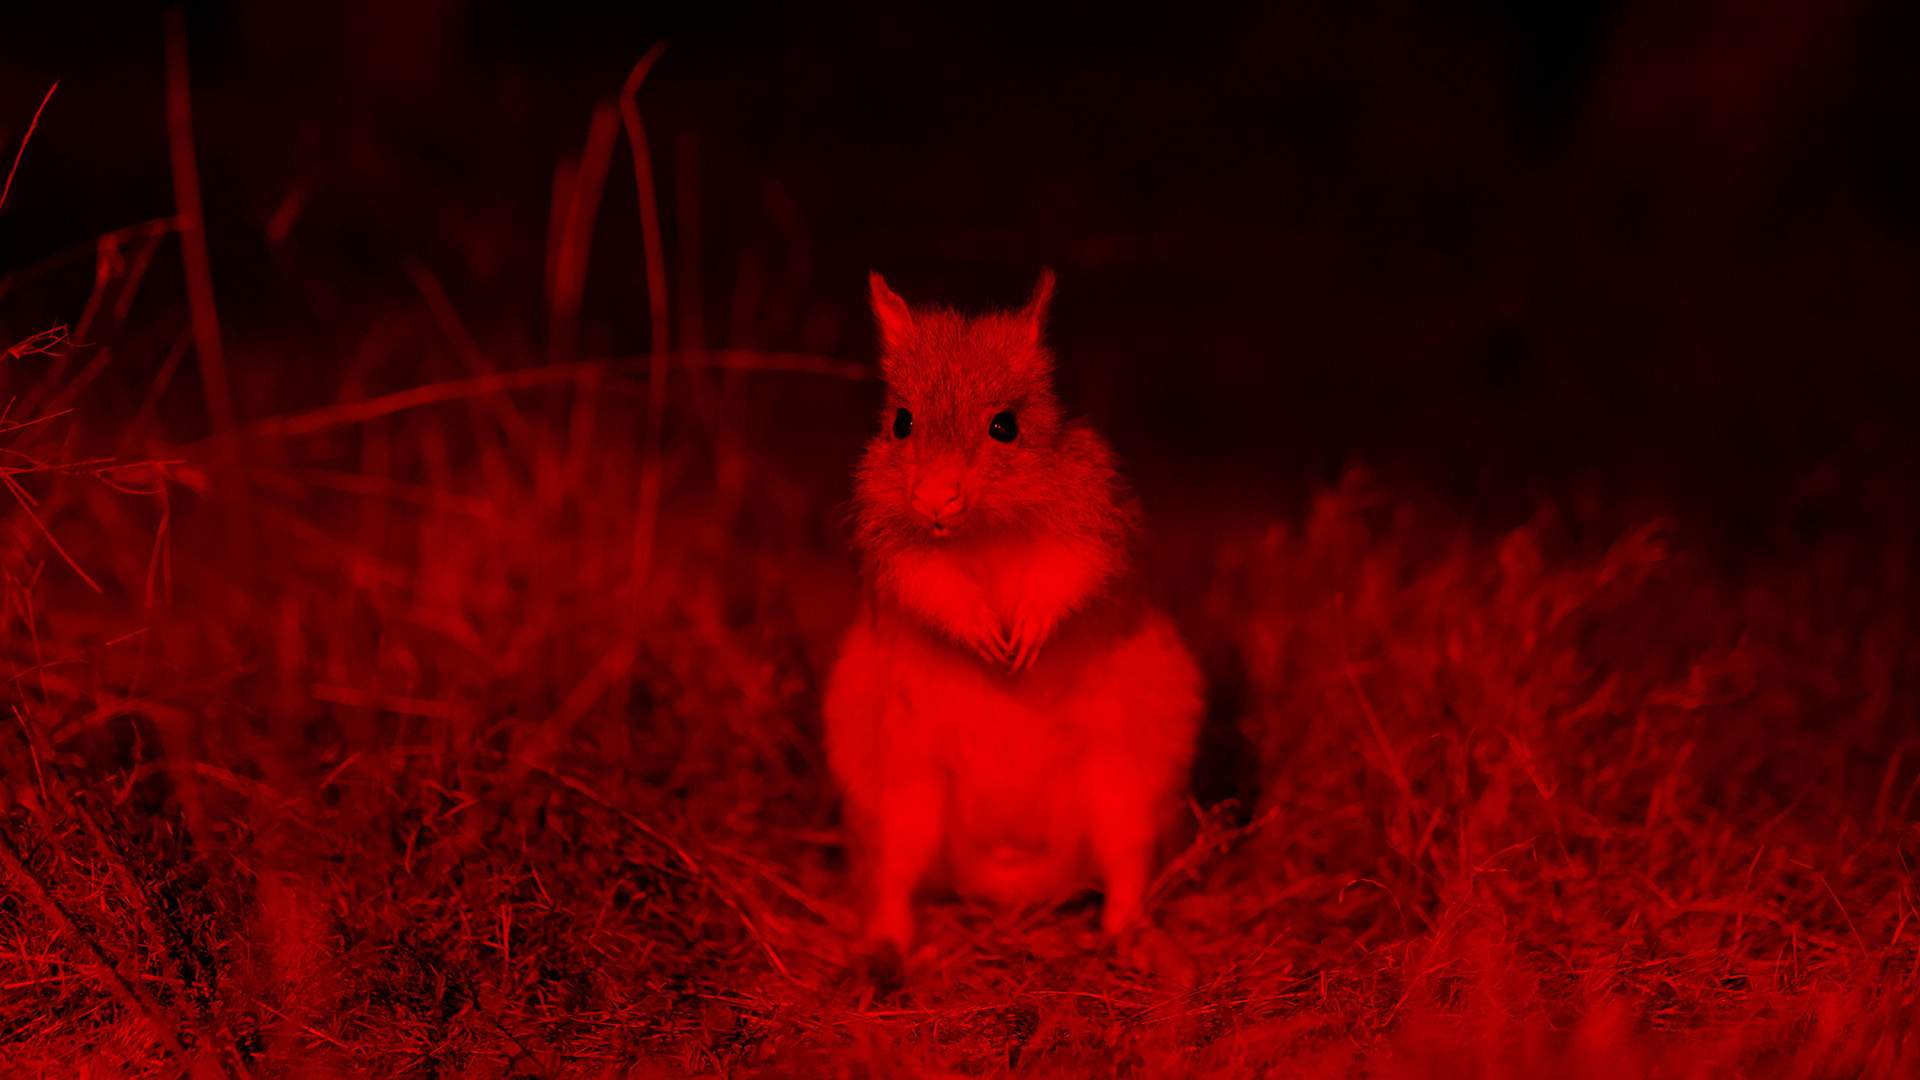 Now Open: Lone Pine Koala Sanctuary's New Nocturnal Precinct Lets You See Cute Critters After Dark